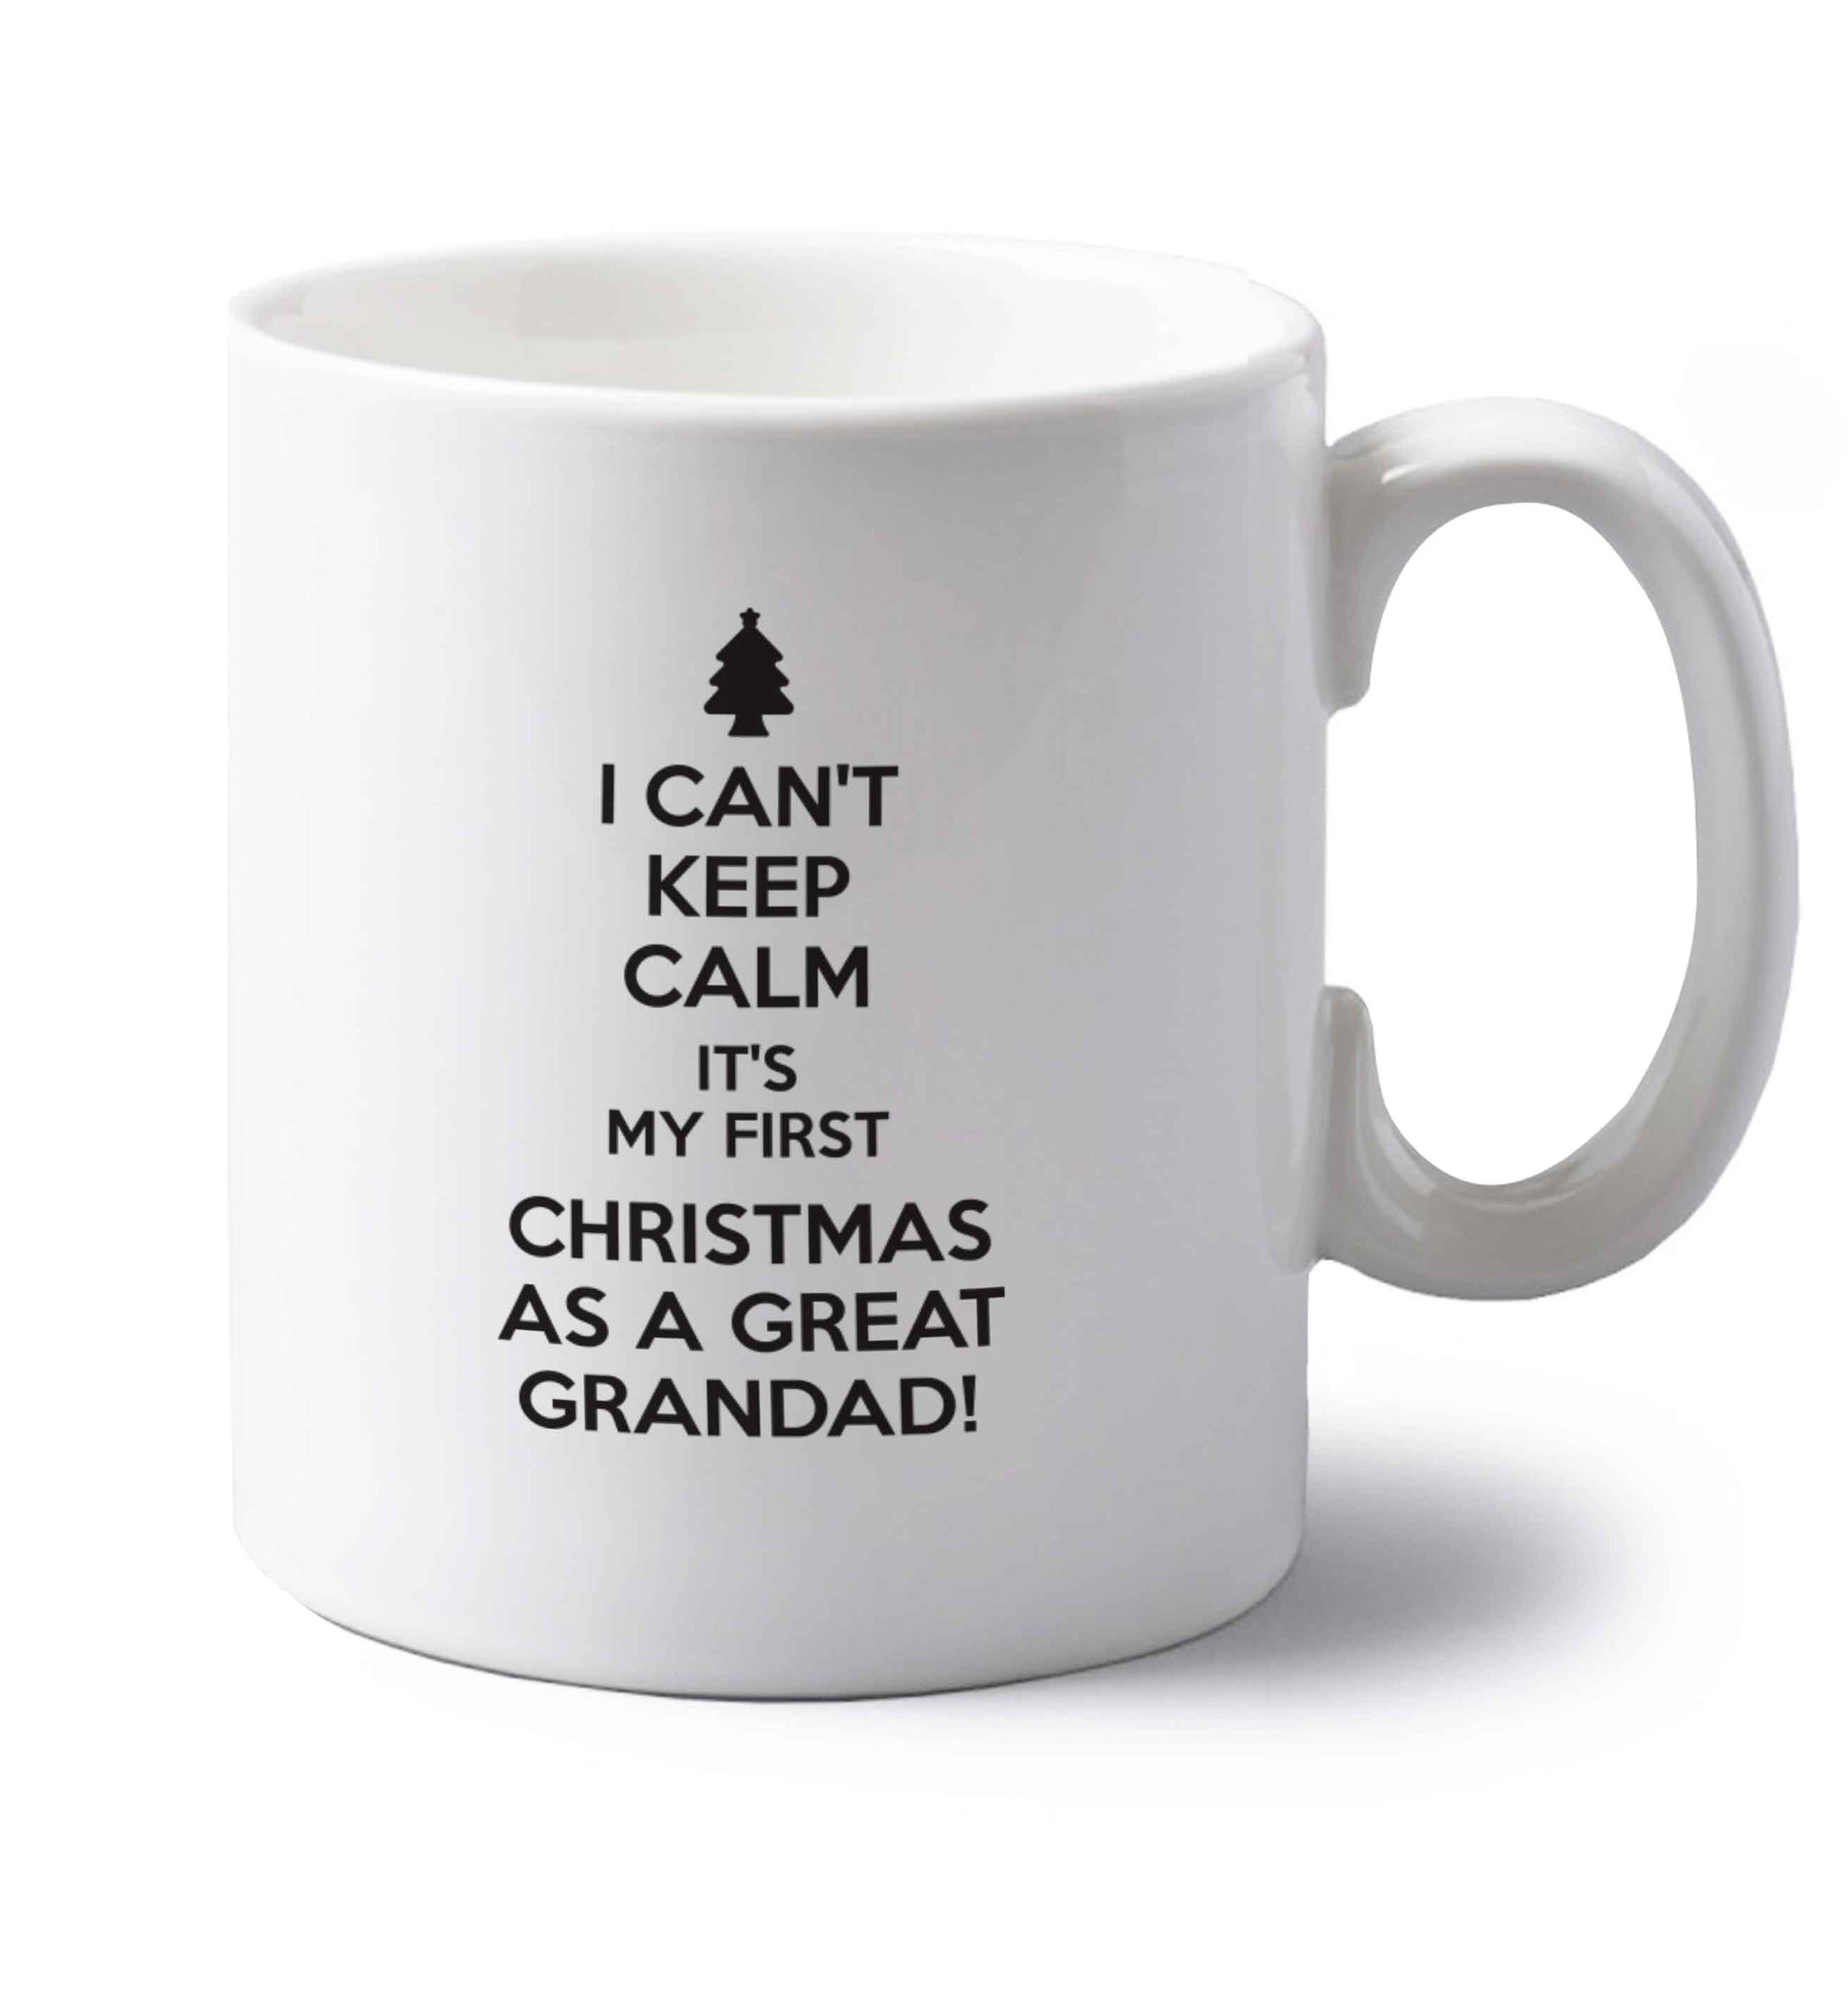 I can't keep calm it's my first Christmas as a great grandad! left handed white ceramic mug 